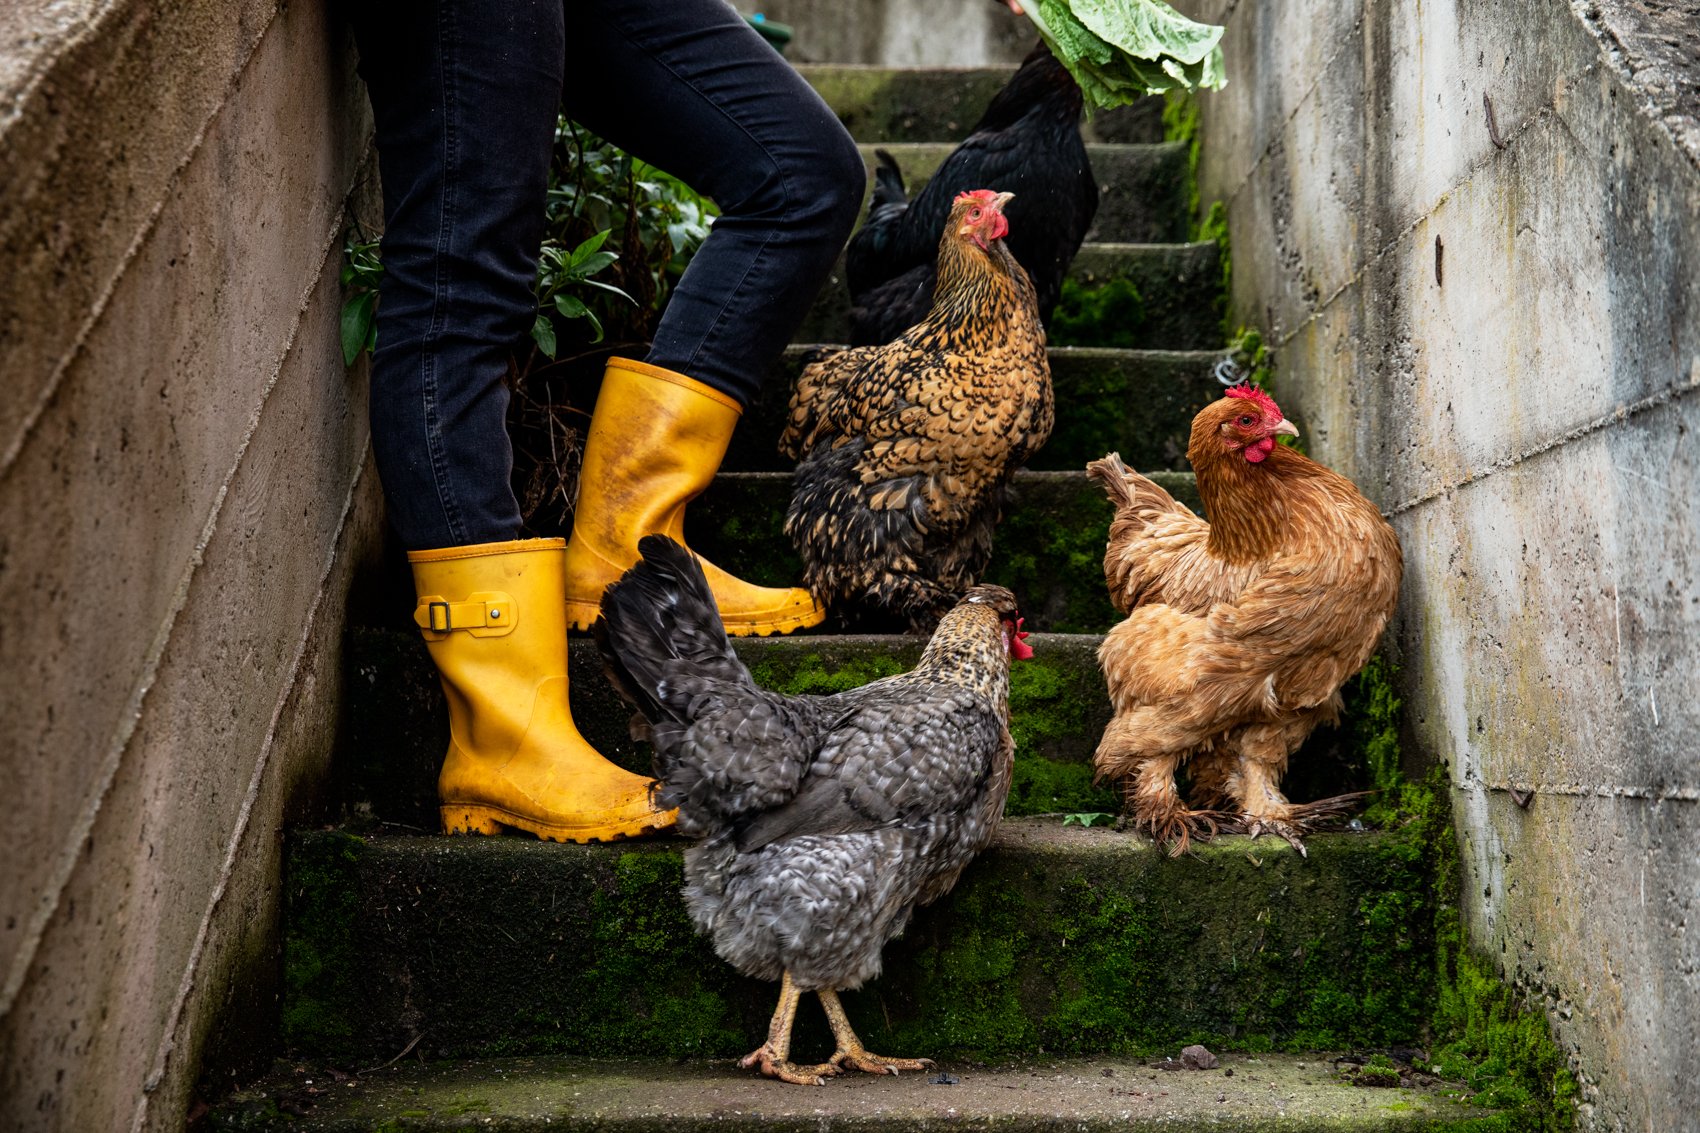 decenzo-angela-chickens-on-stairs-with-yellow-rain-boots-20220315_41A3879.jpg